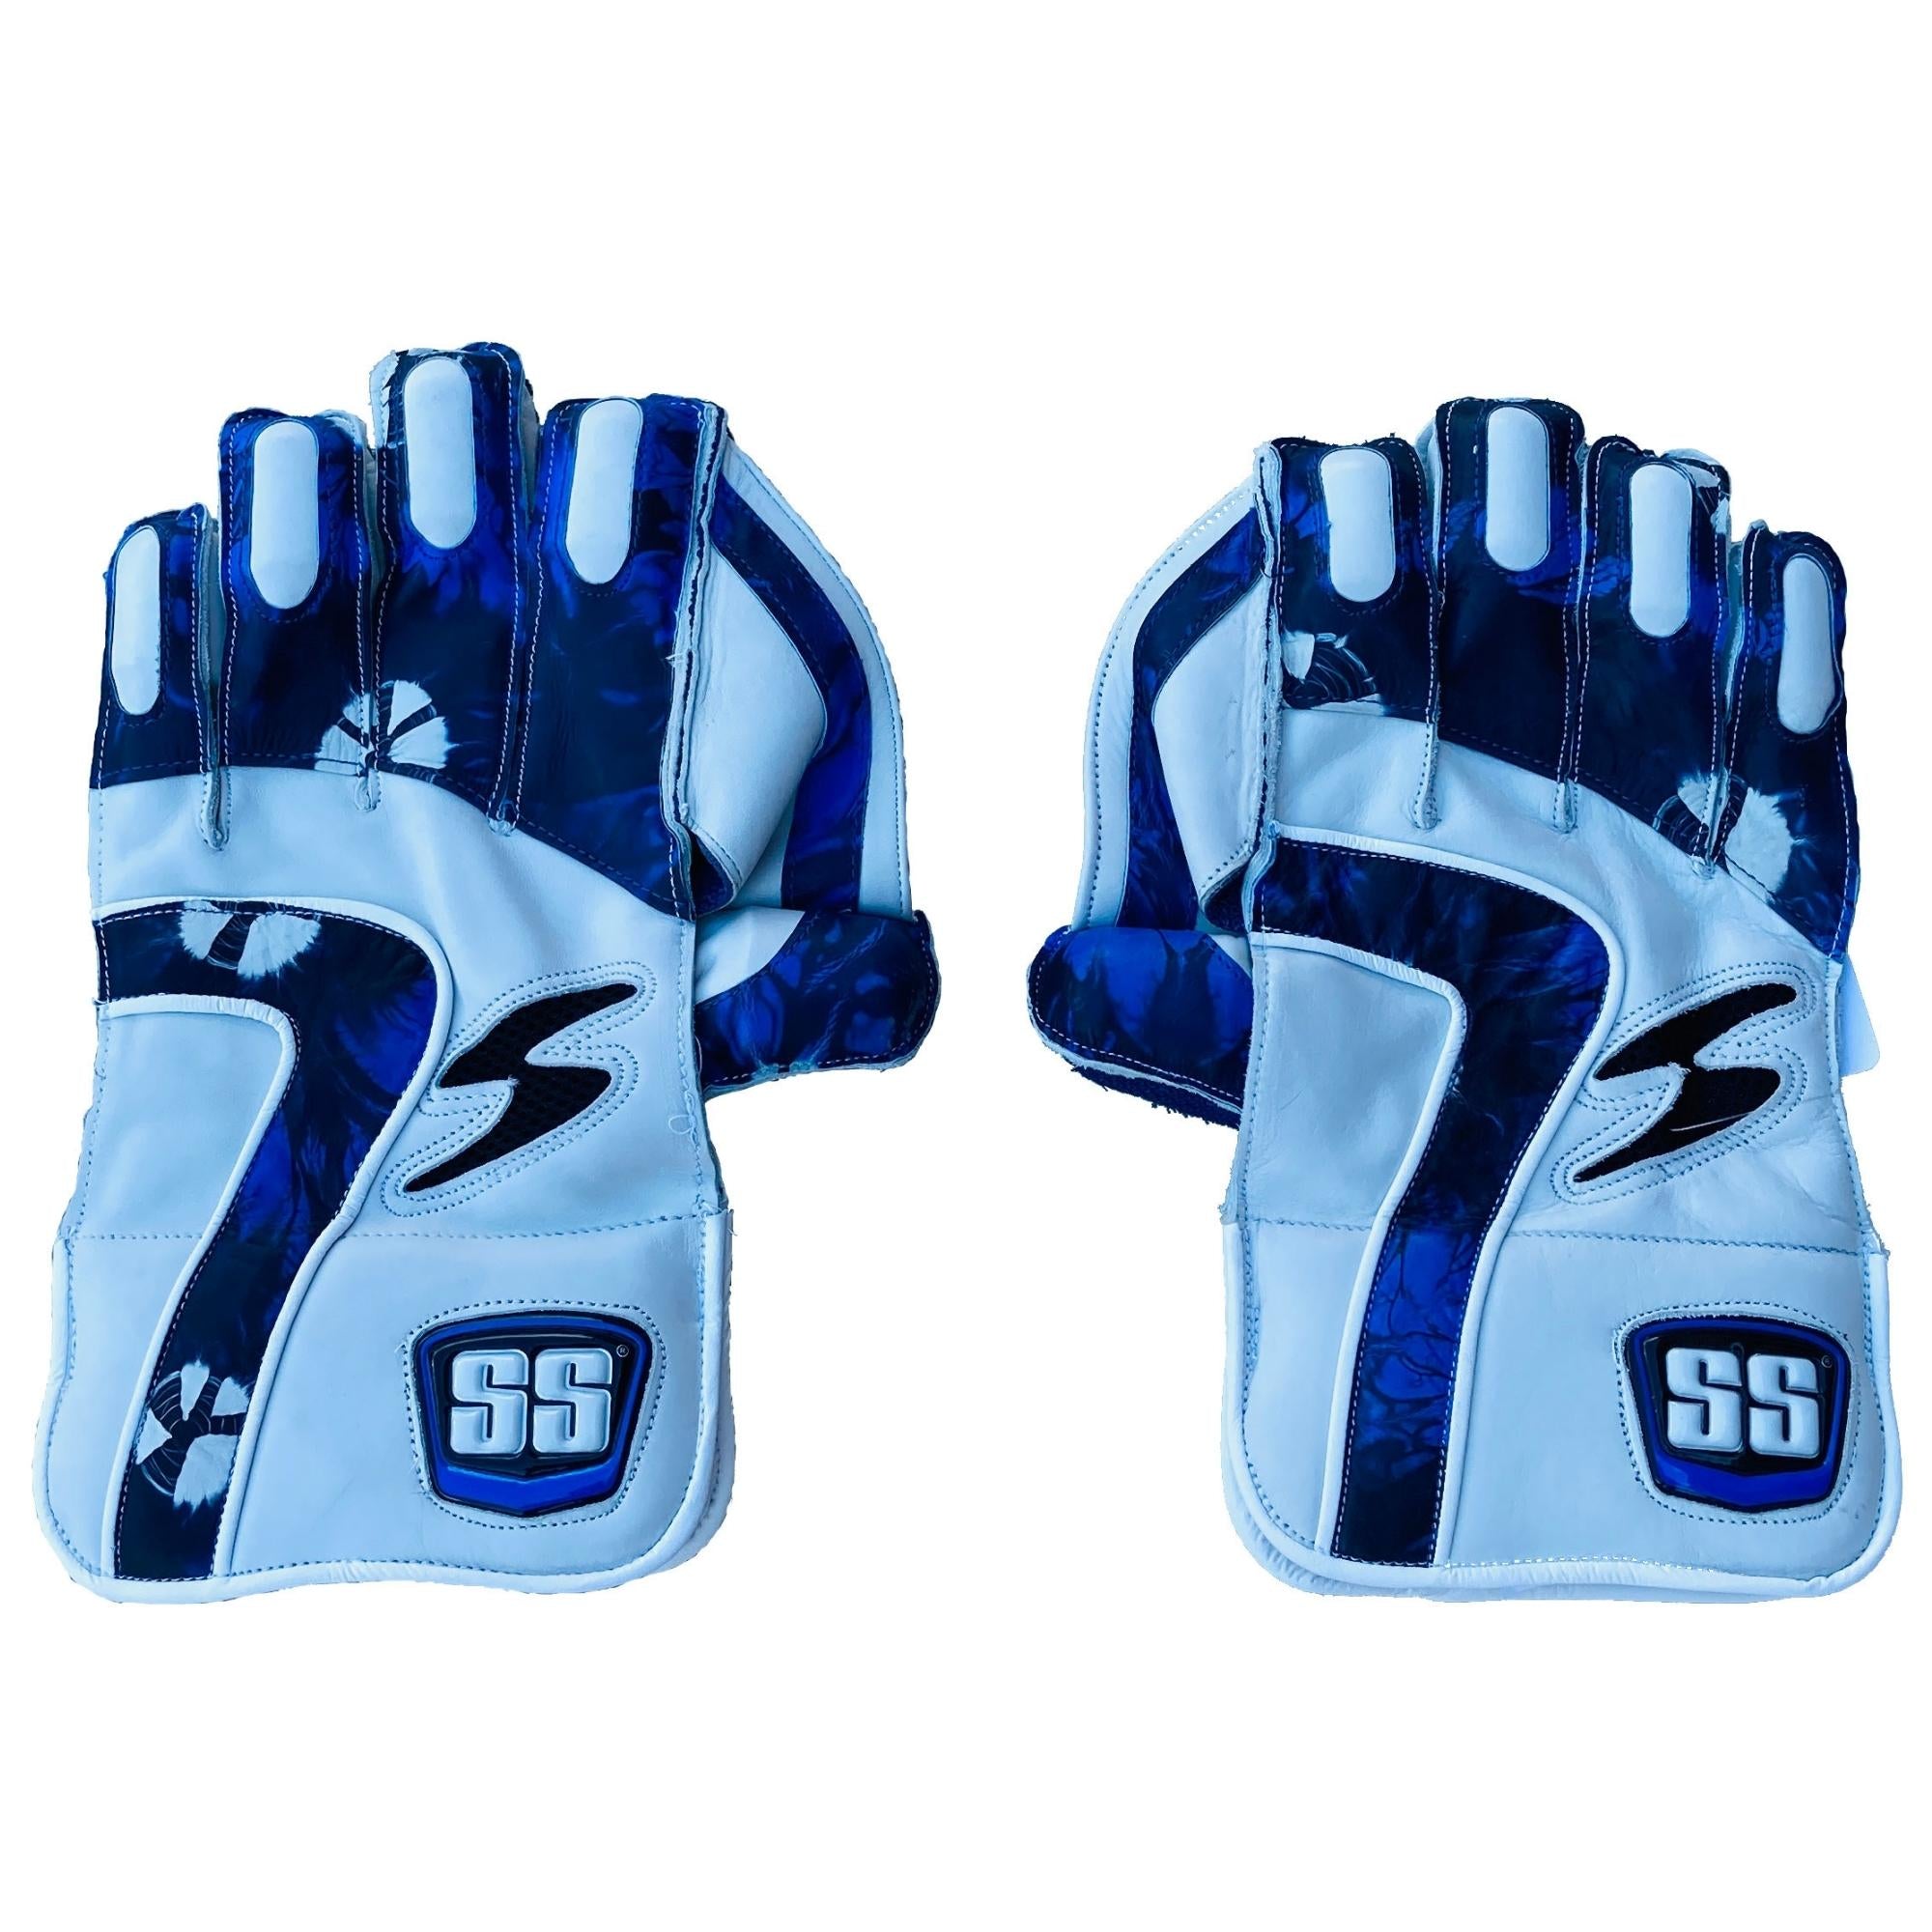 SS Wicket Keeping Gloves | SS Player Series